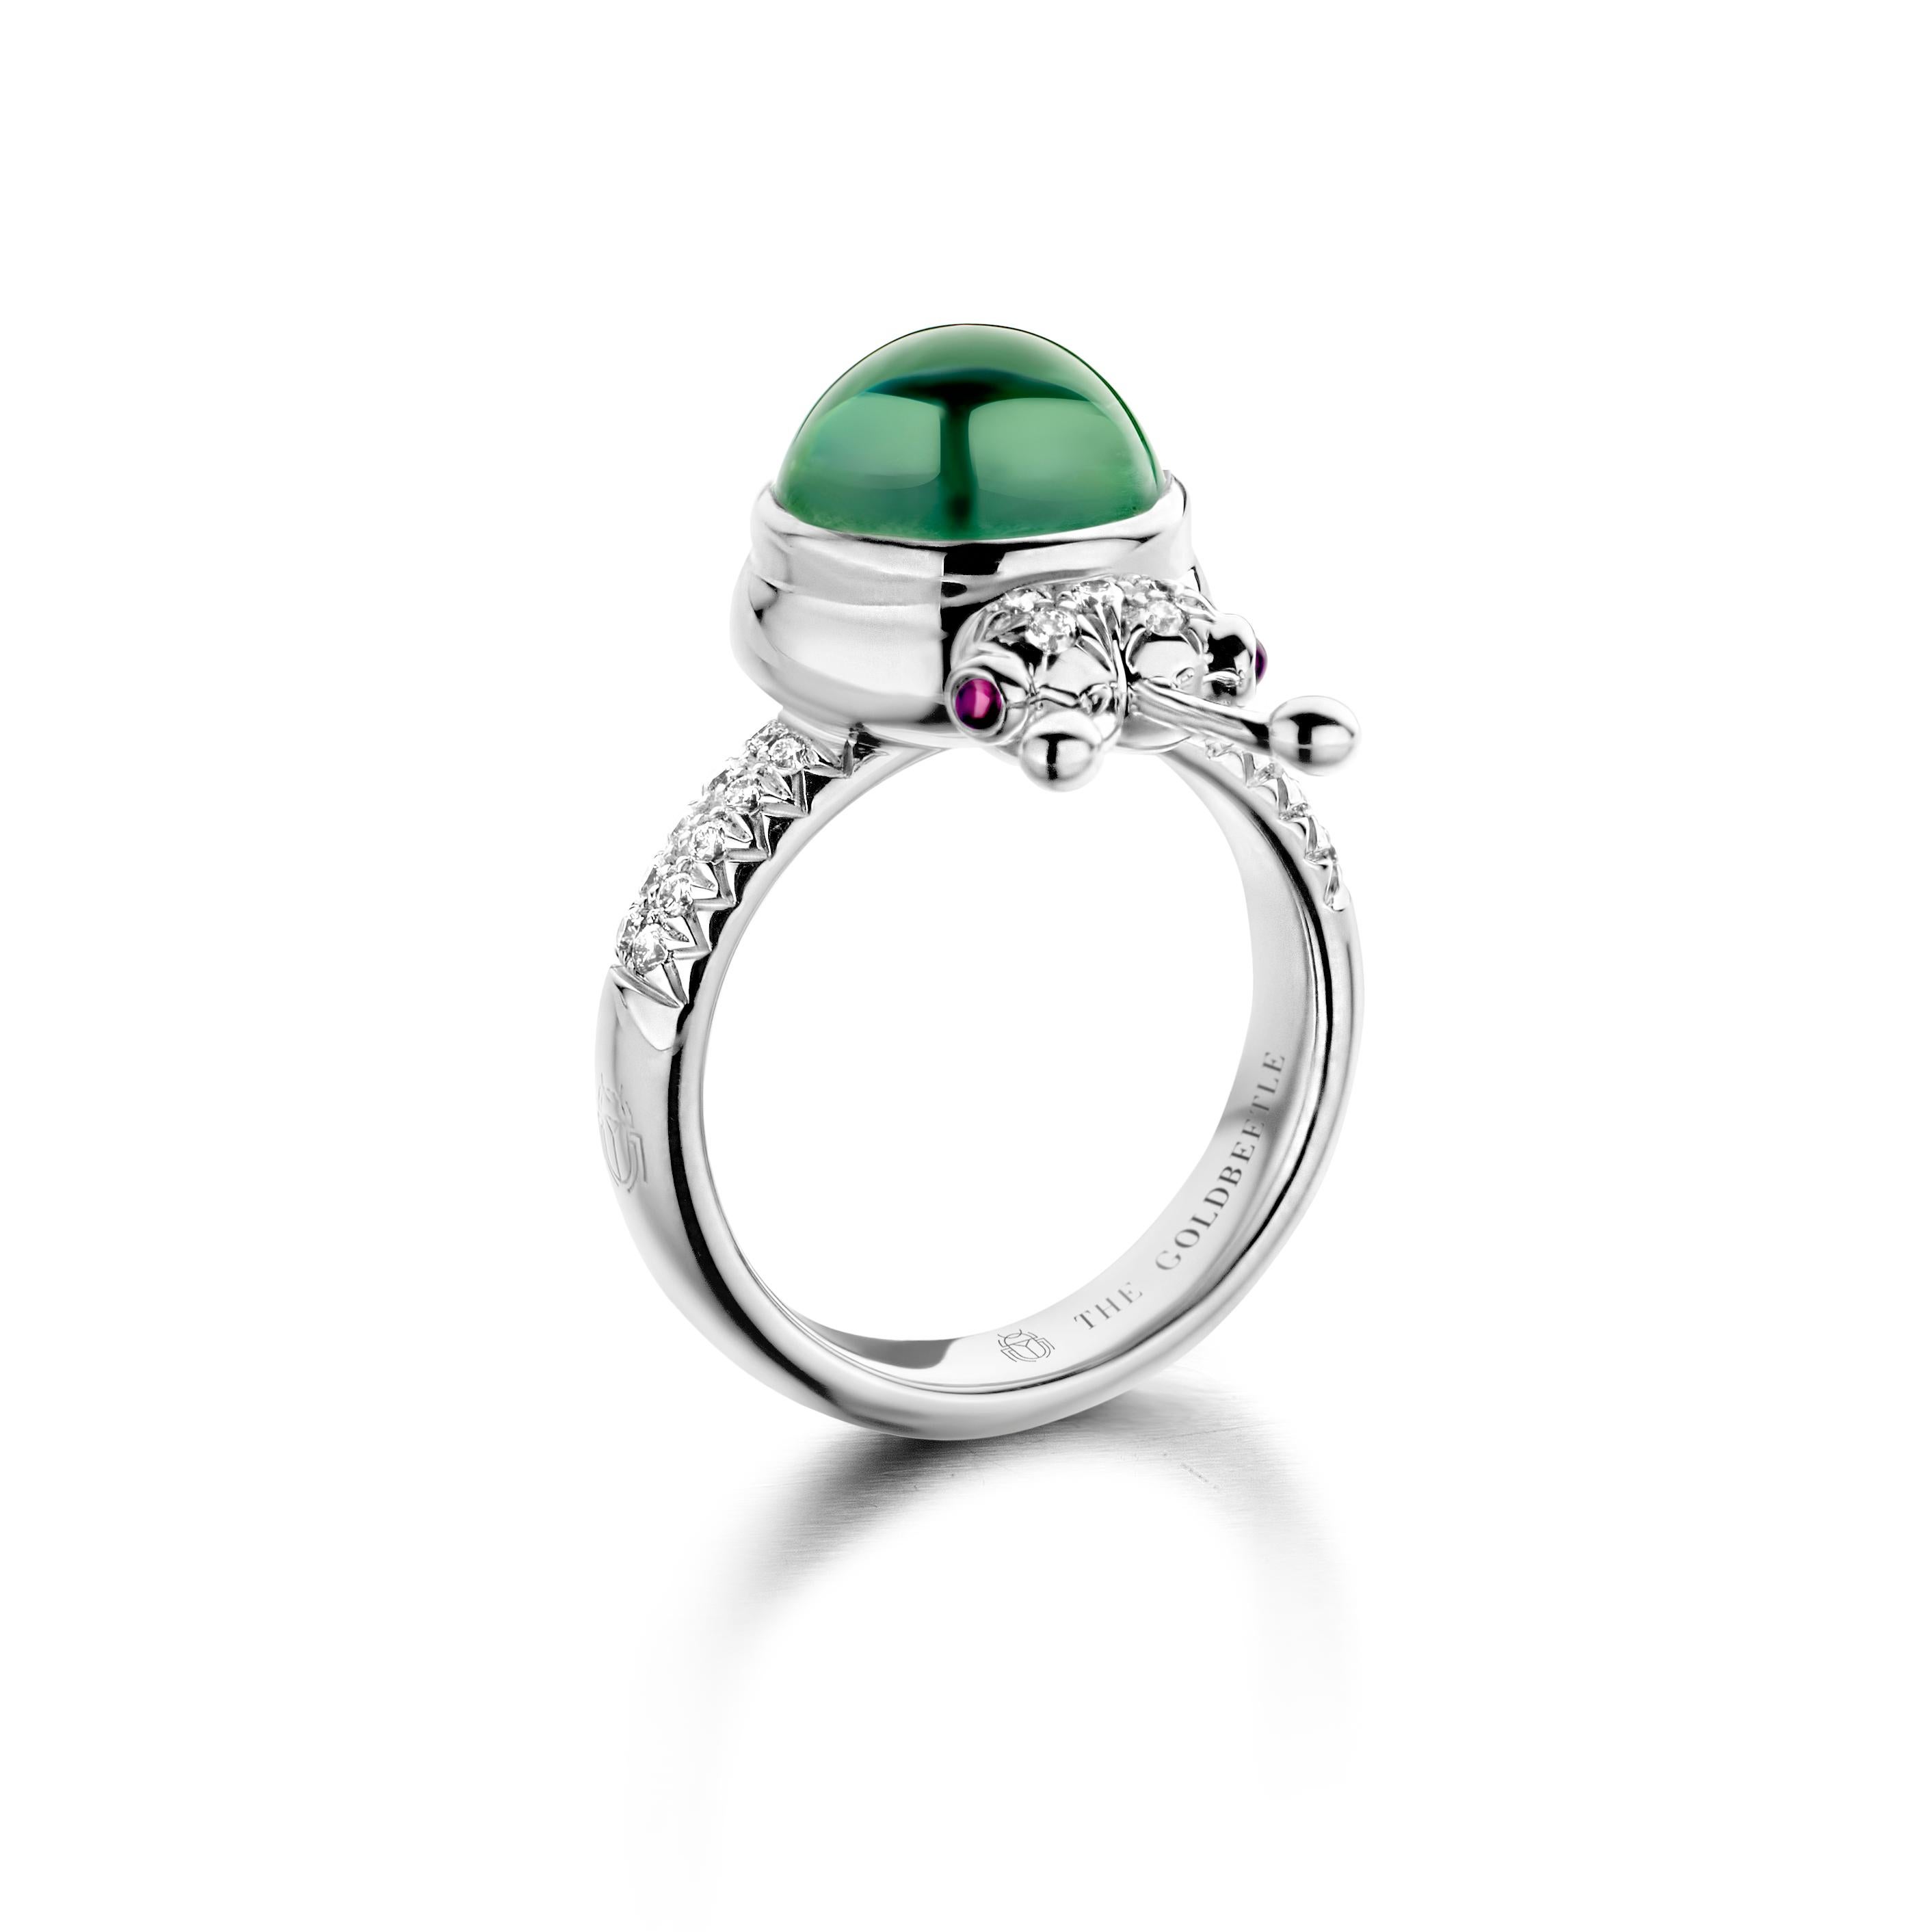 One of a kind lucky beetle ring in 18K white gold 10g set with the finest diamonds in brilliant cut 0,23Ct (VVS/DEF quality) one natural, mint tourmaline in round cabochon cut 4,69Ct and two pink tourmalines in round cabochon cut. 

Celine Roelens,